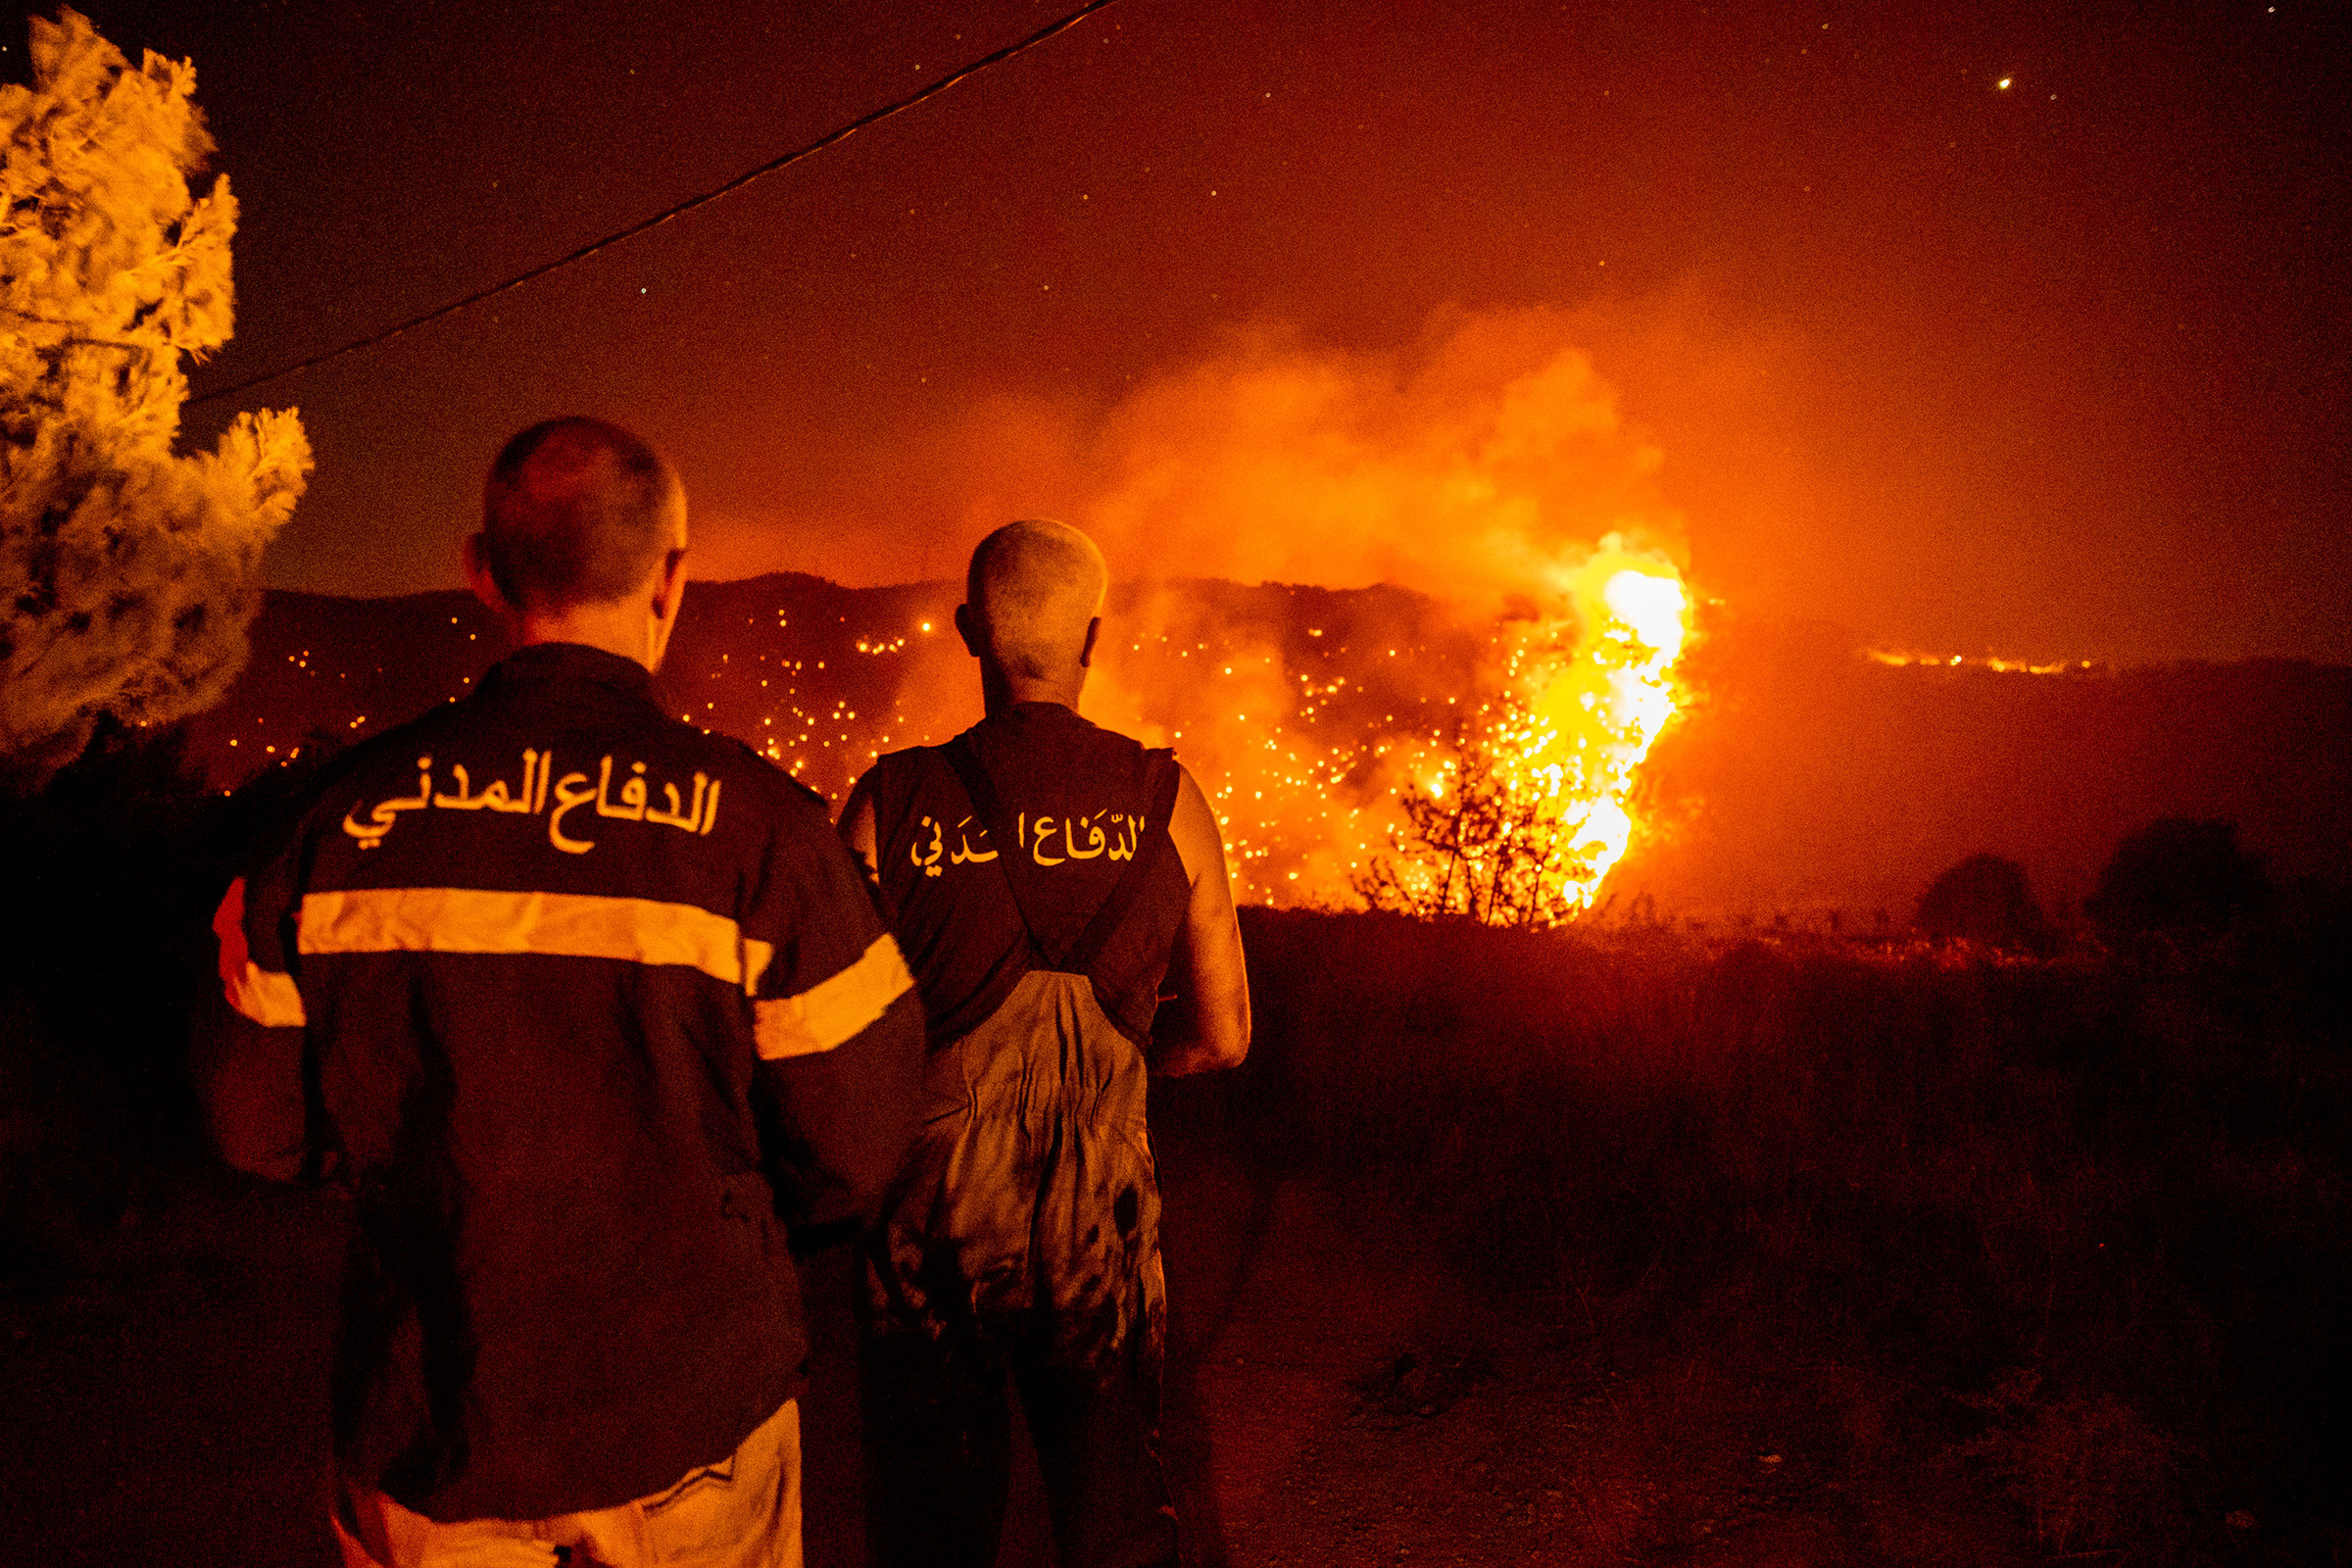 Civil Defense personnel monitor a wildfire burning through hills on July 28 in Qobayat, Lebanon. A Lebanese teenager was killed as he joined volunteers battling to fight the fire.